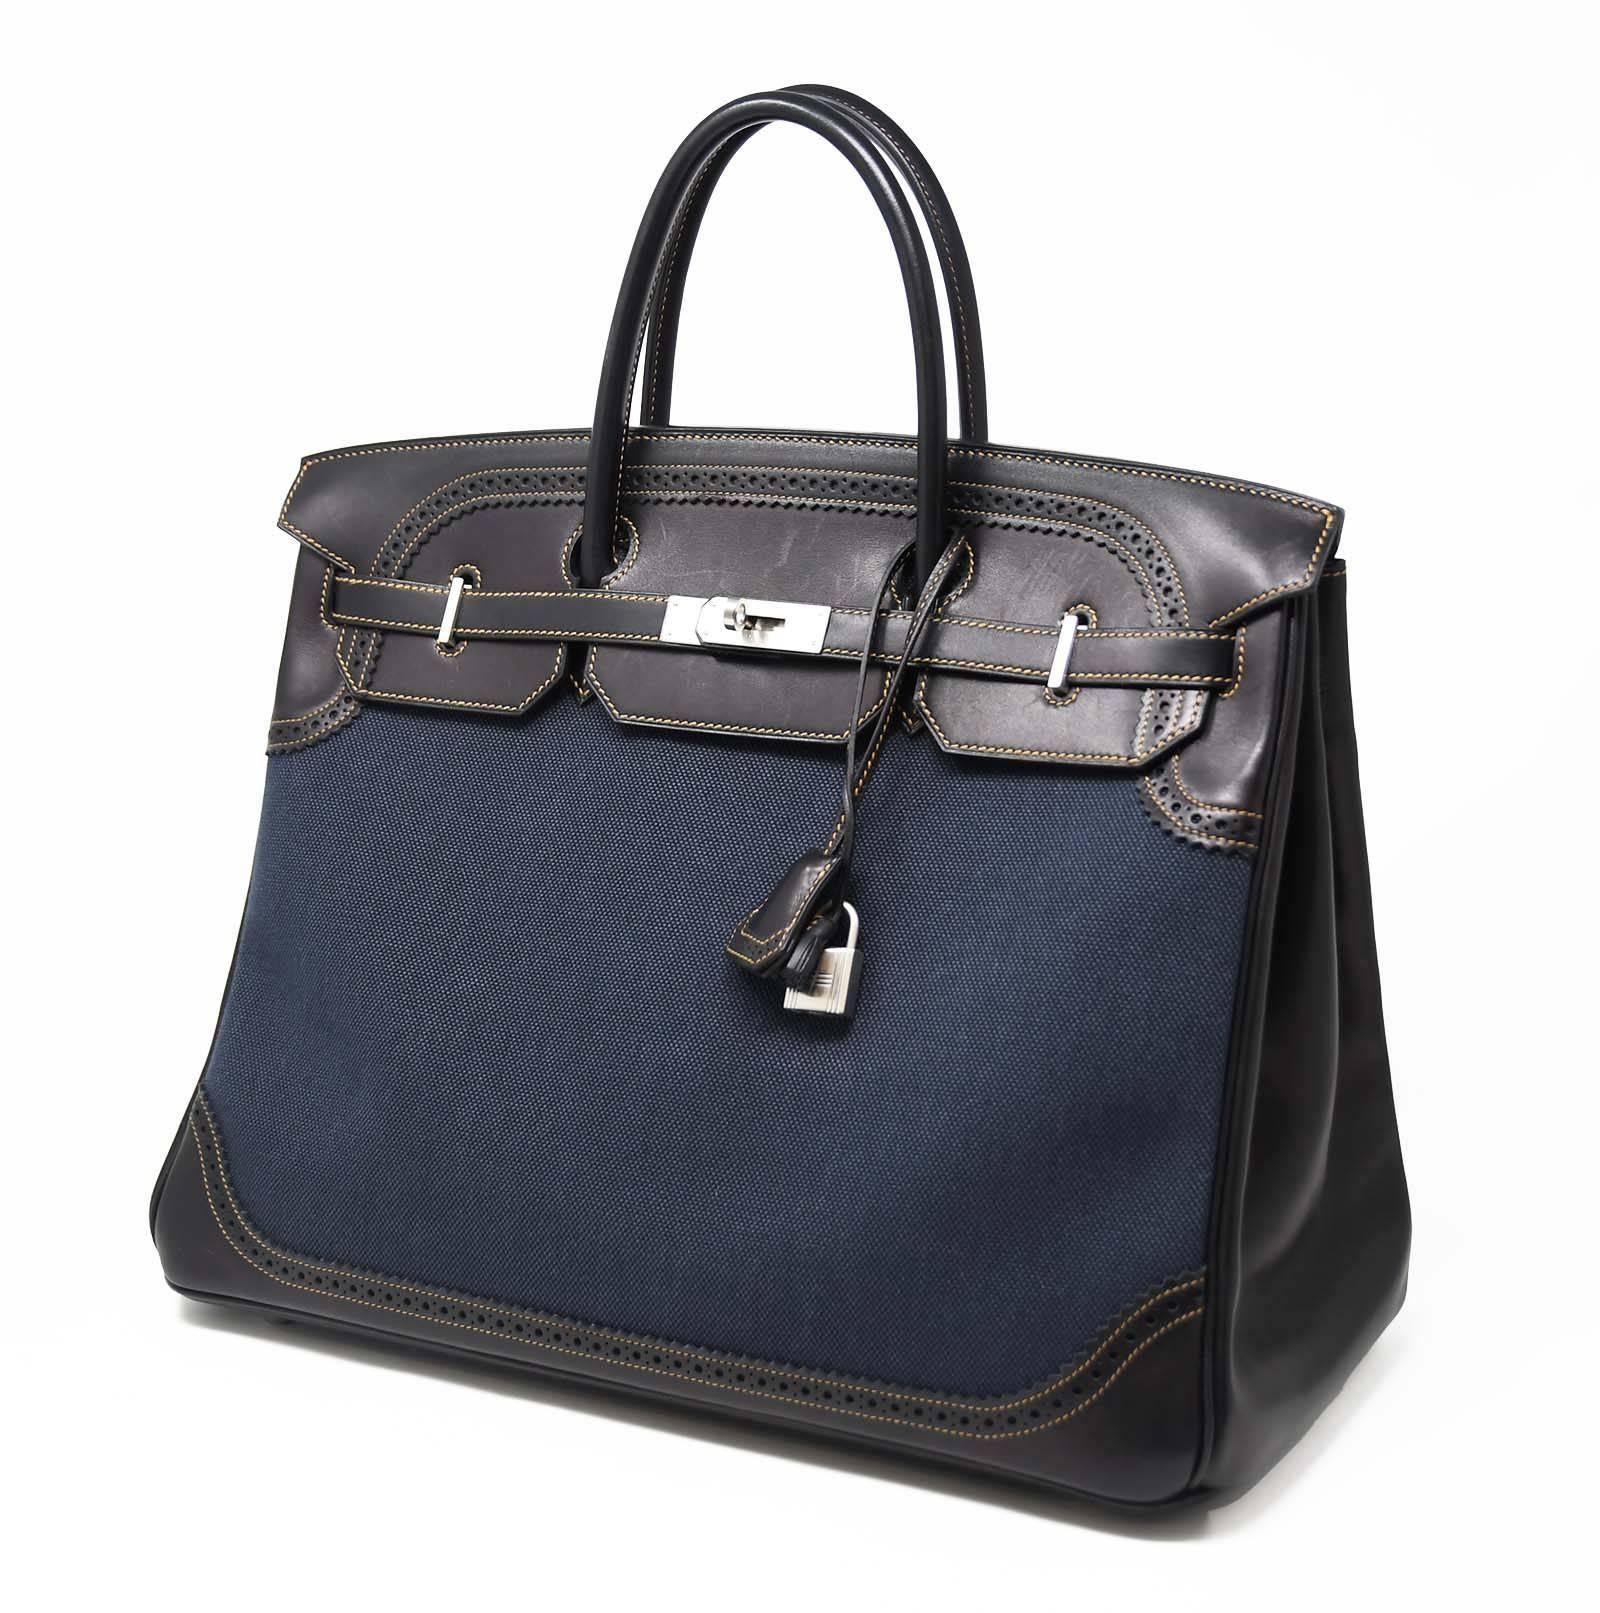 Extremely coveted Ghillies Birkin bag, new with plastic on the hardware.  The swift leather is dark brown and the rest a denim toile.  The hardware is palladium.  On the inside there are two large leather pockets on each side, one open and the other